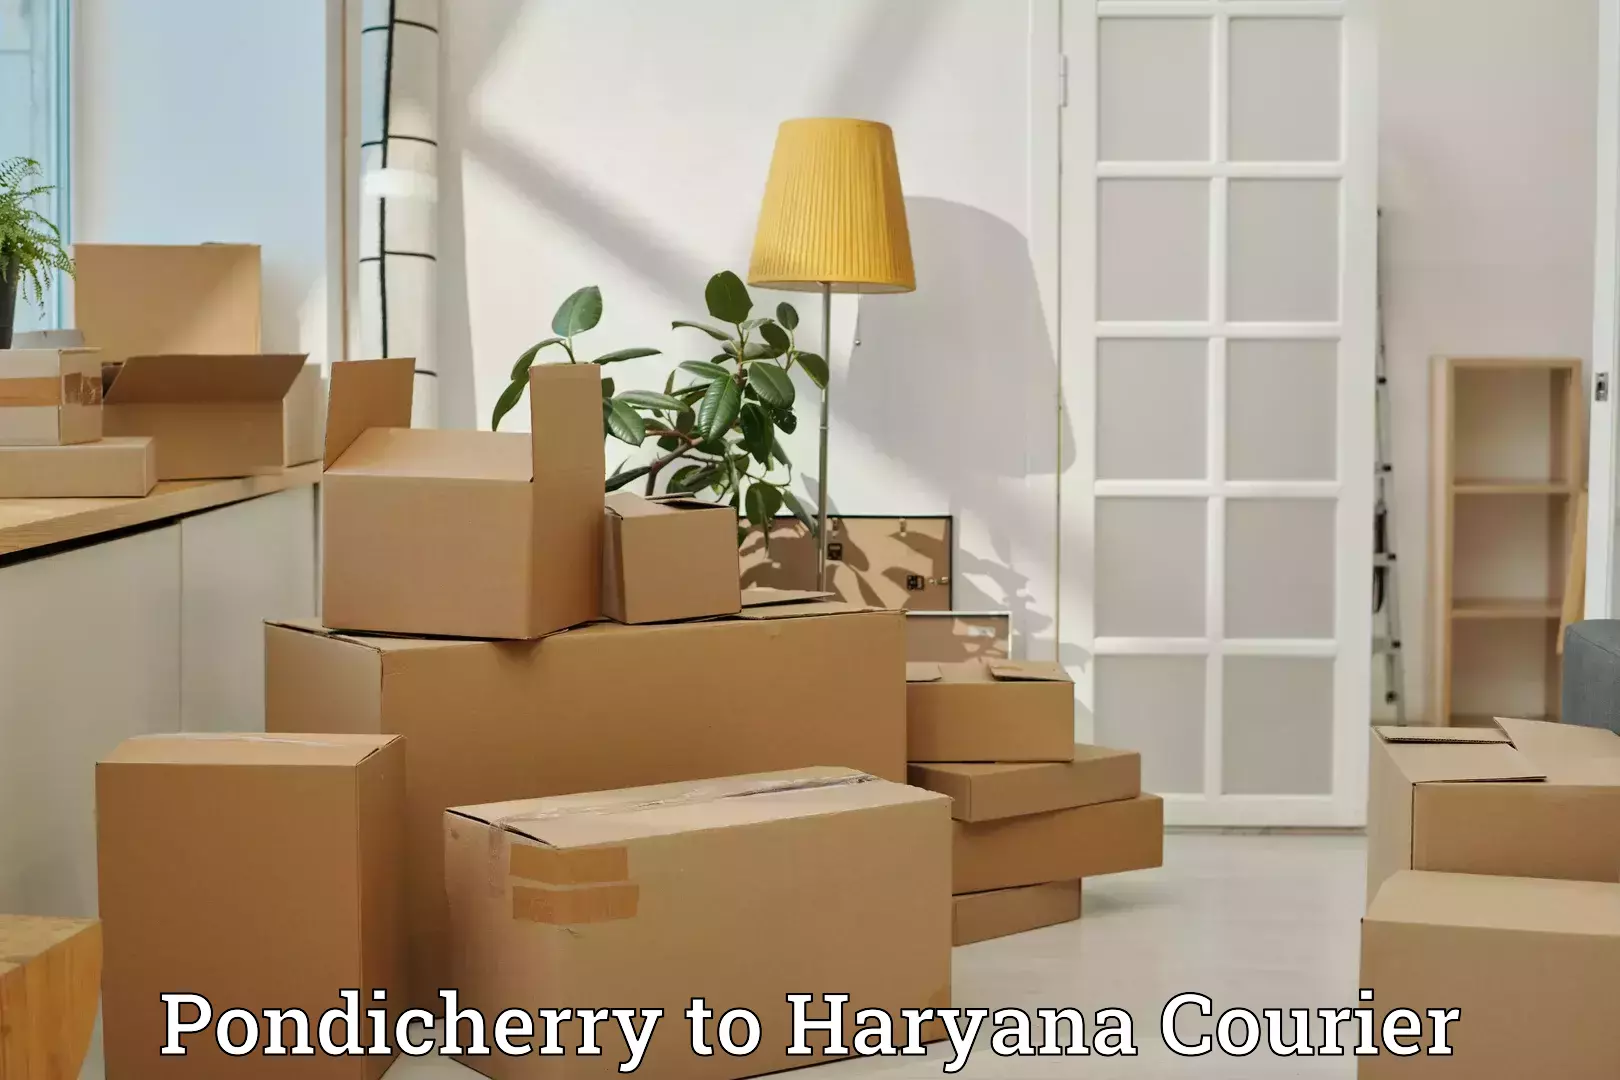 Luggage transport consultancy Pondicherry to Odhan